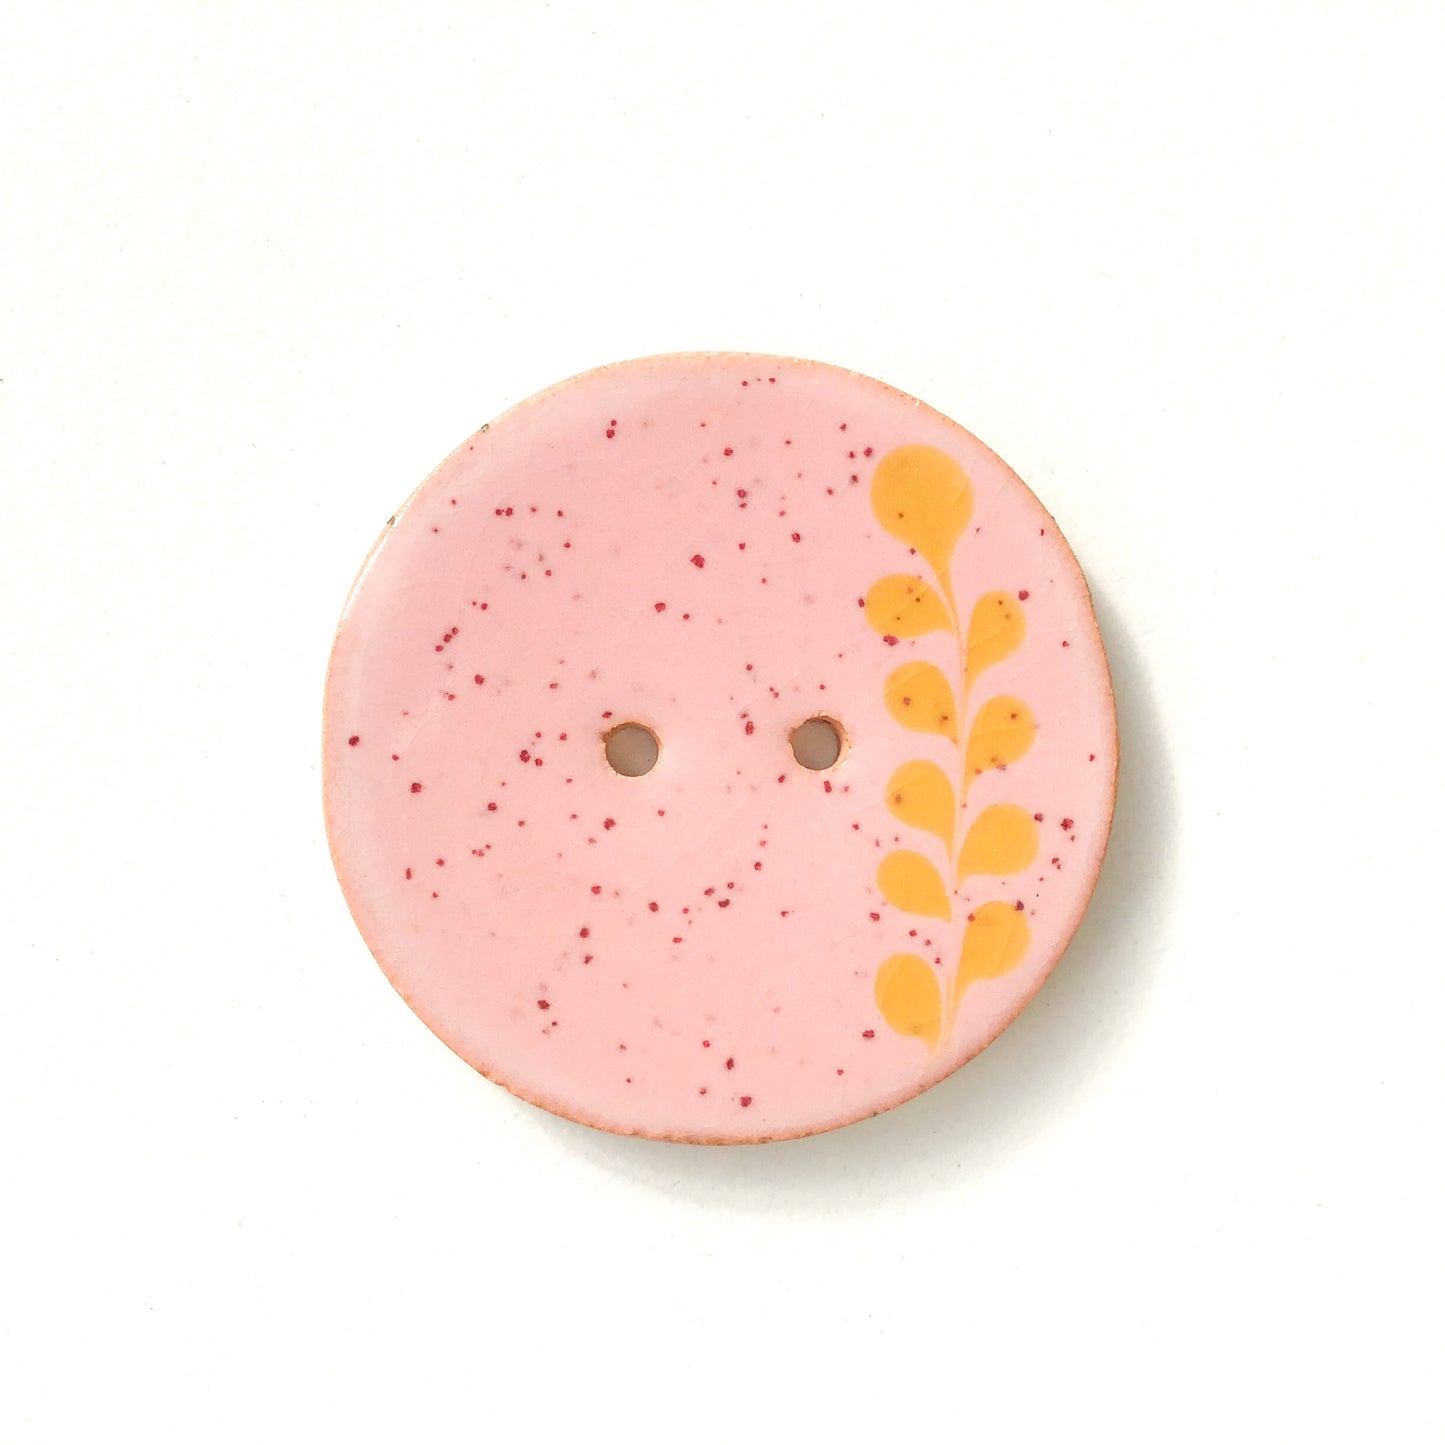 Speckled Pink Ceramic Button with Light Brown Detail - Decorative Ceramic Button - 1 3/8"